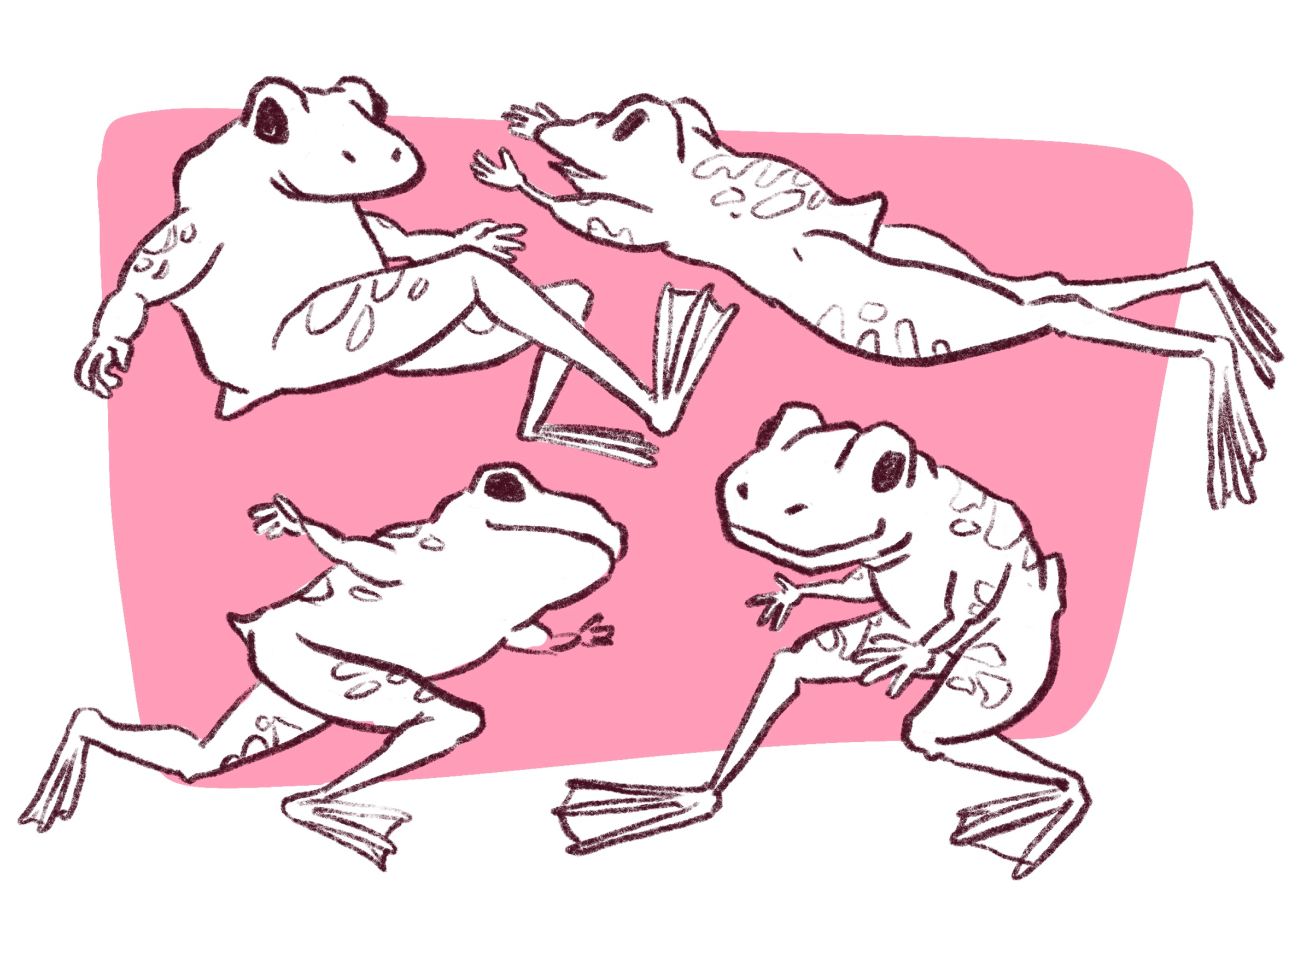 frogs hanging out together